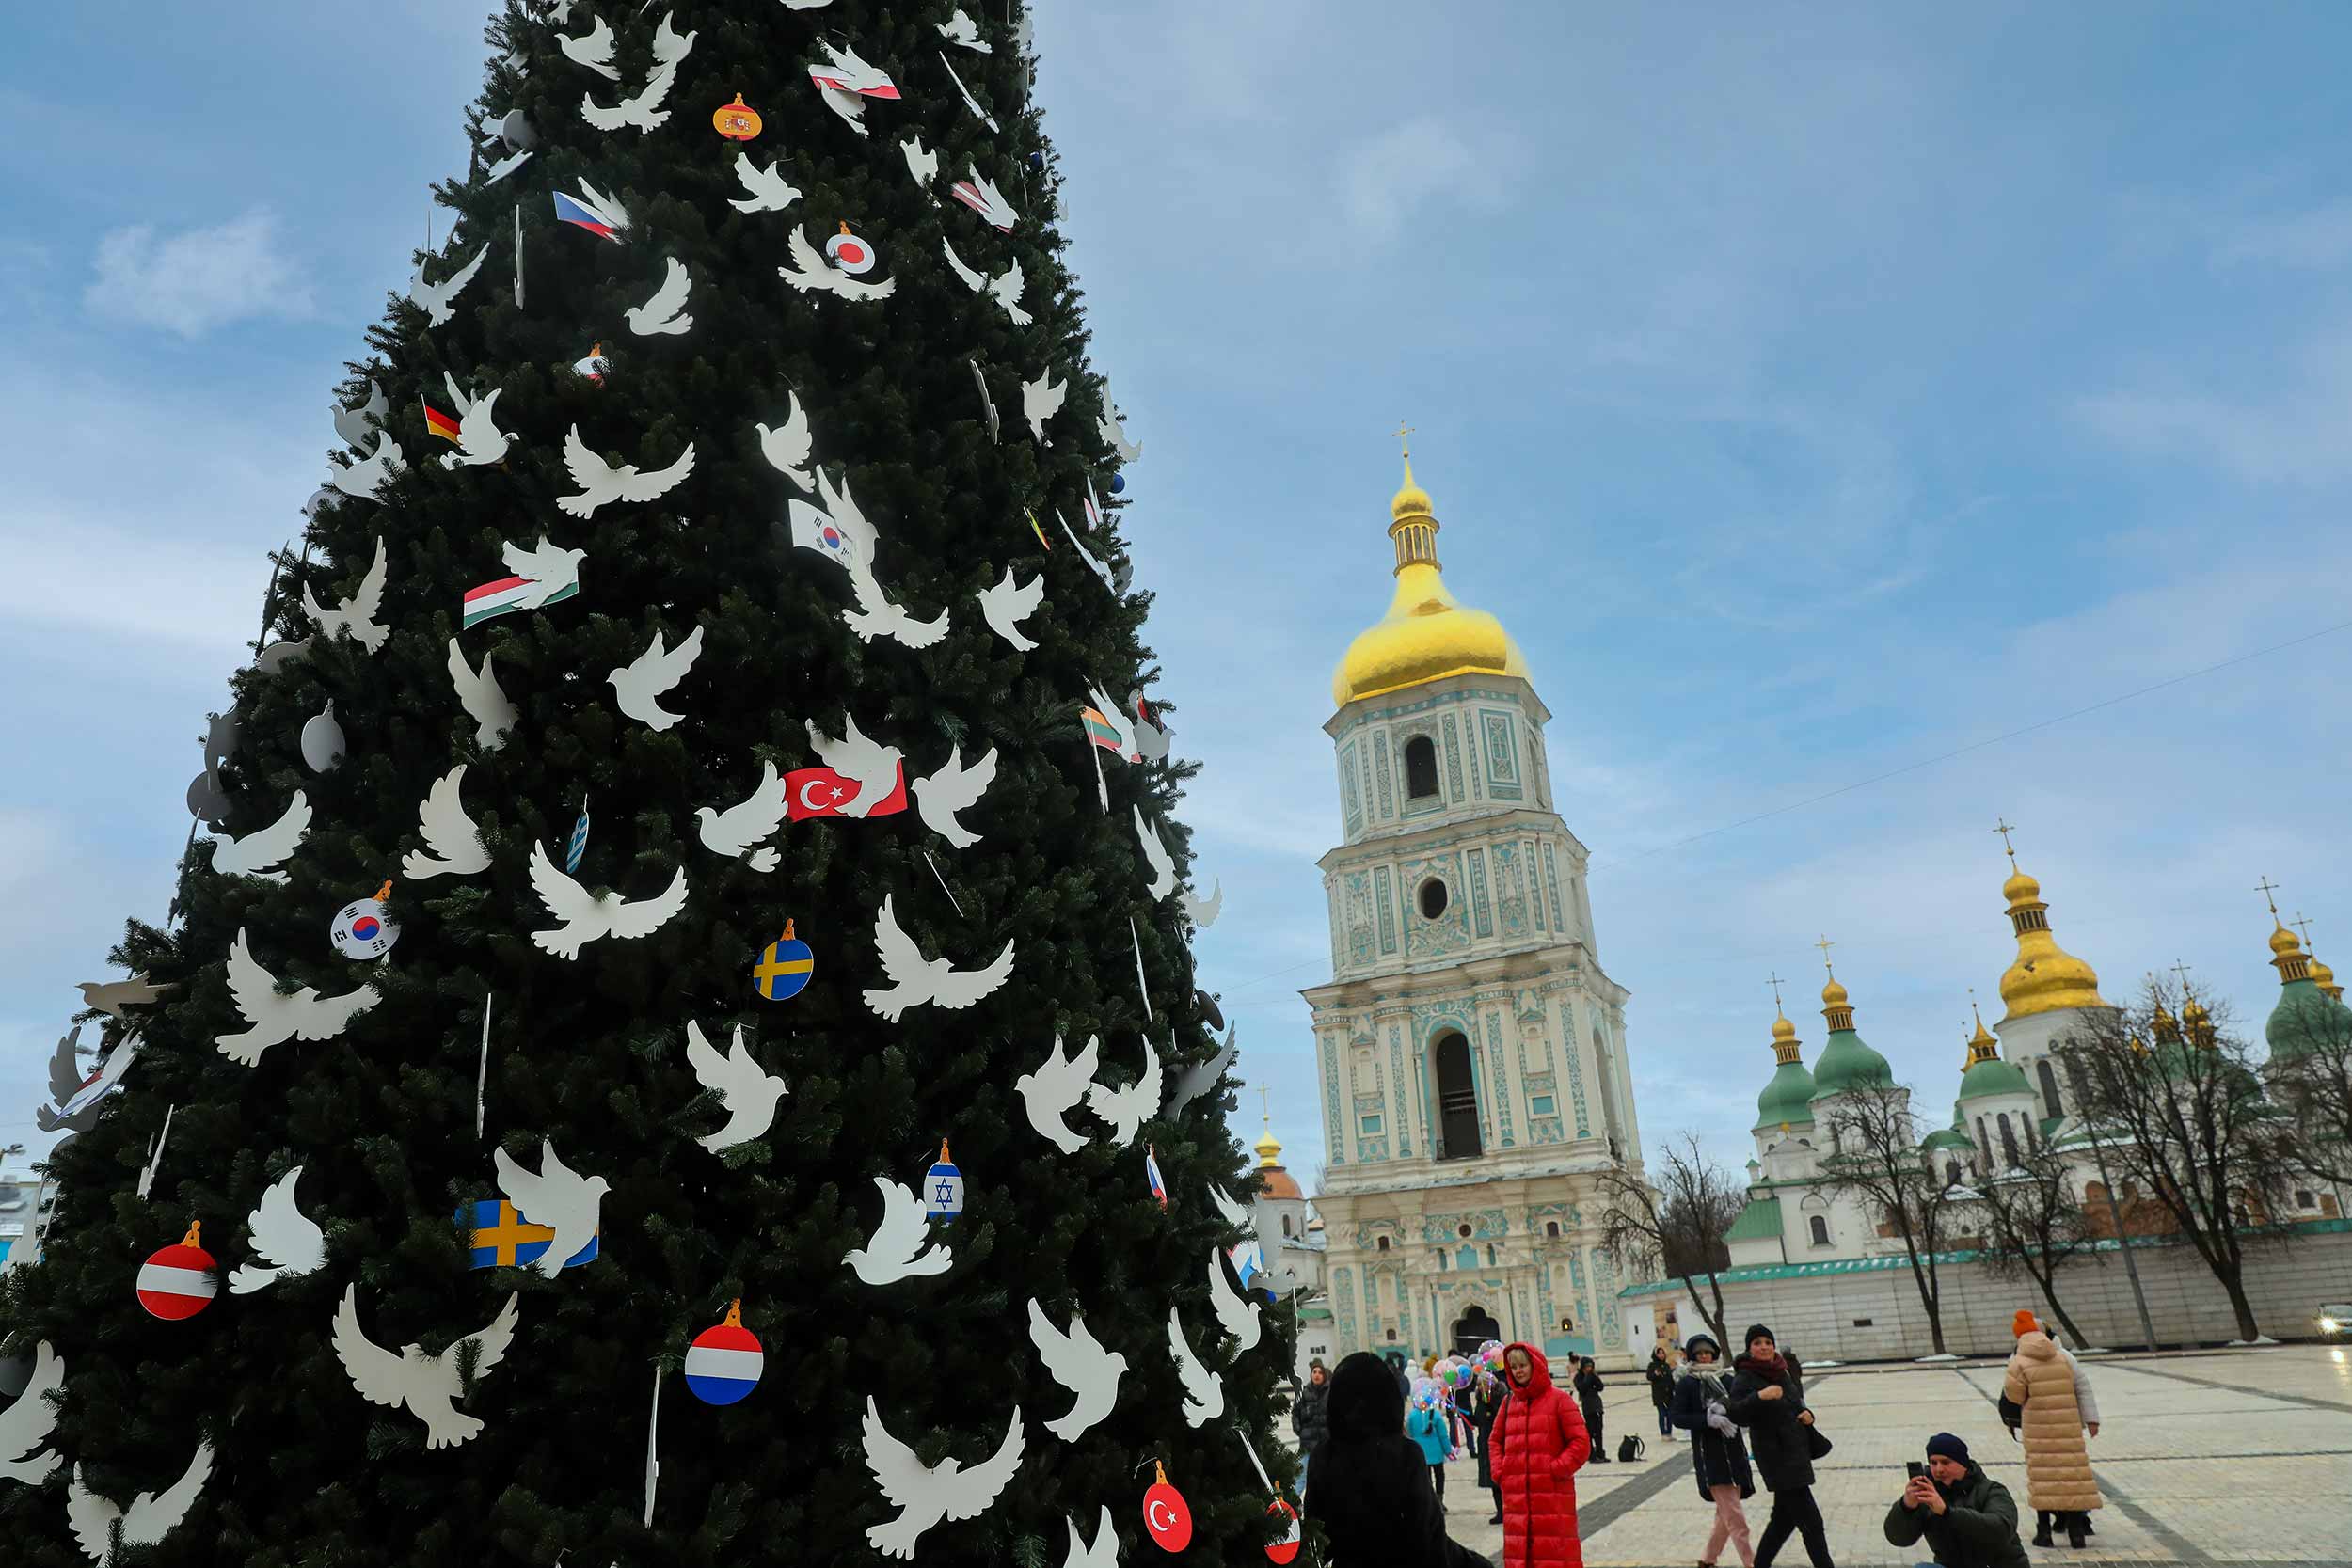 A sober Christmas tree in Kyiv’s central square of Santa Sophia. Due to the continuous blackout caused by Russian shelling, the tree is lit only a few hours a day. © Dmytro Larin